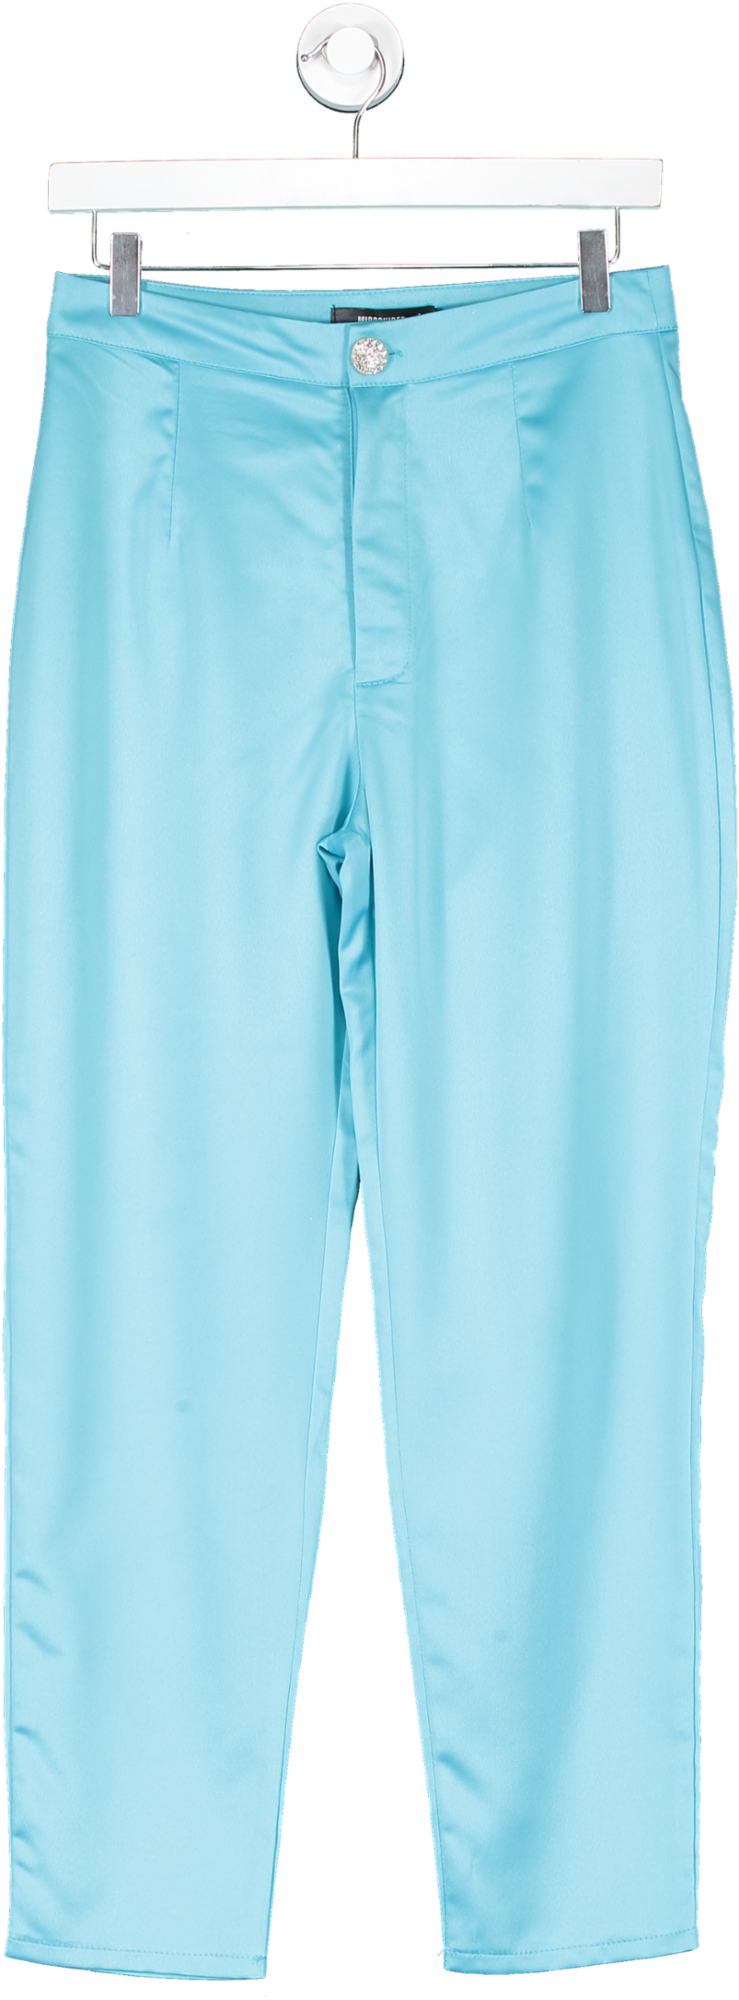 Missguided Turquoise Blue Trousers With Crystal Button Detail UK 10